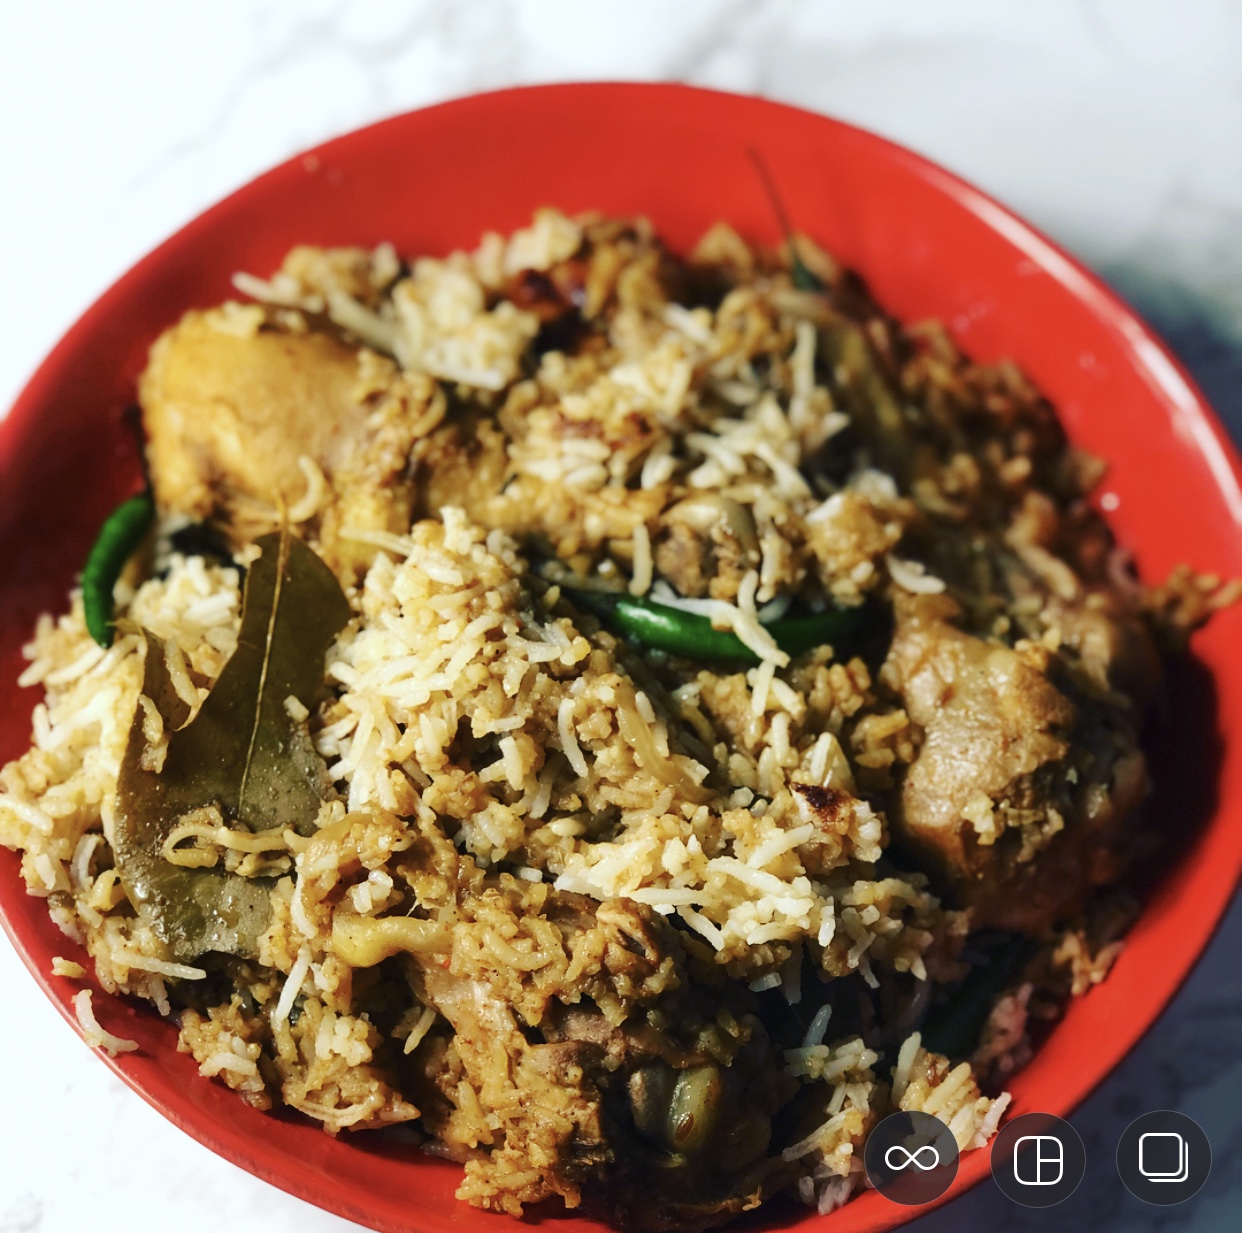 A bowl of rice, chicken, chili peppers and bay leaves.